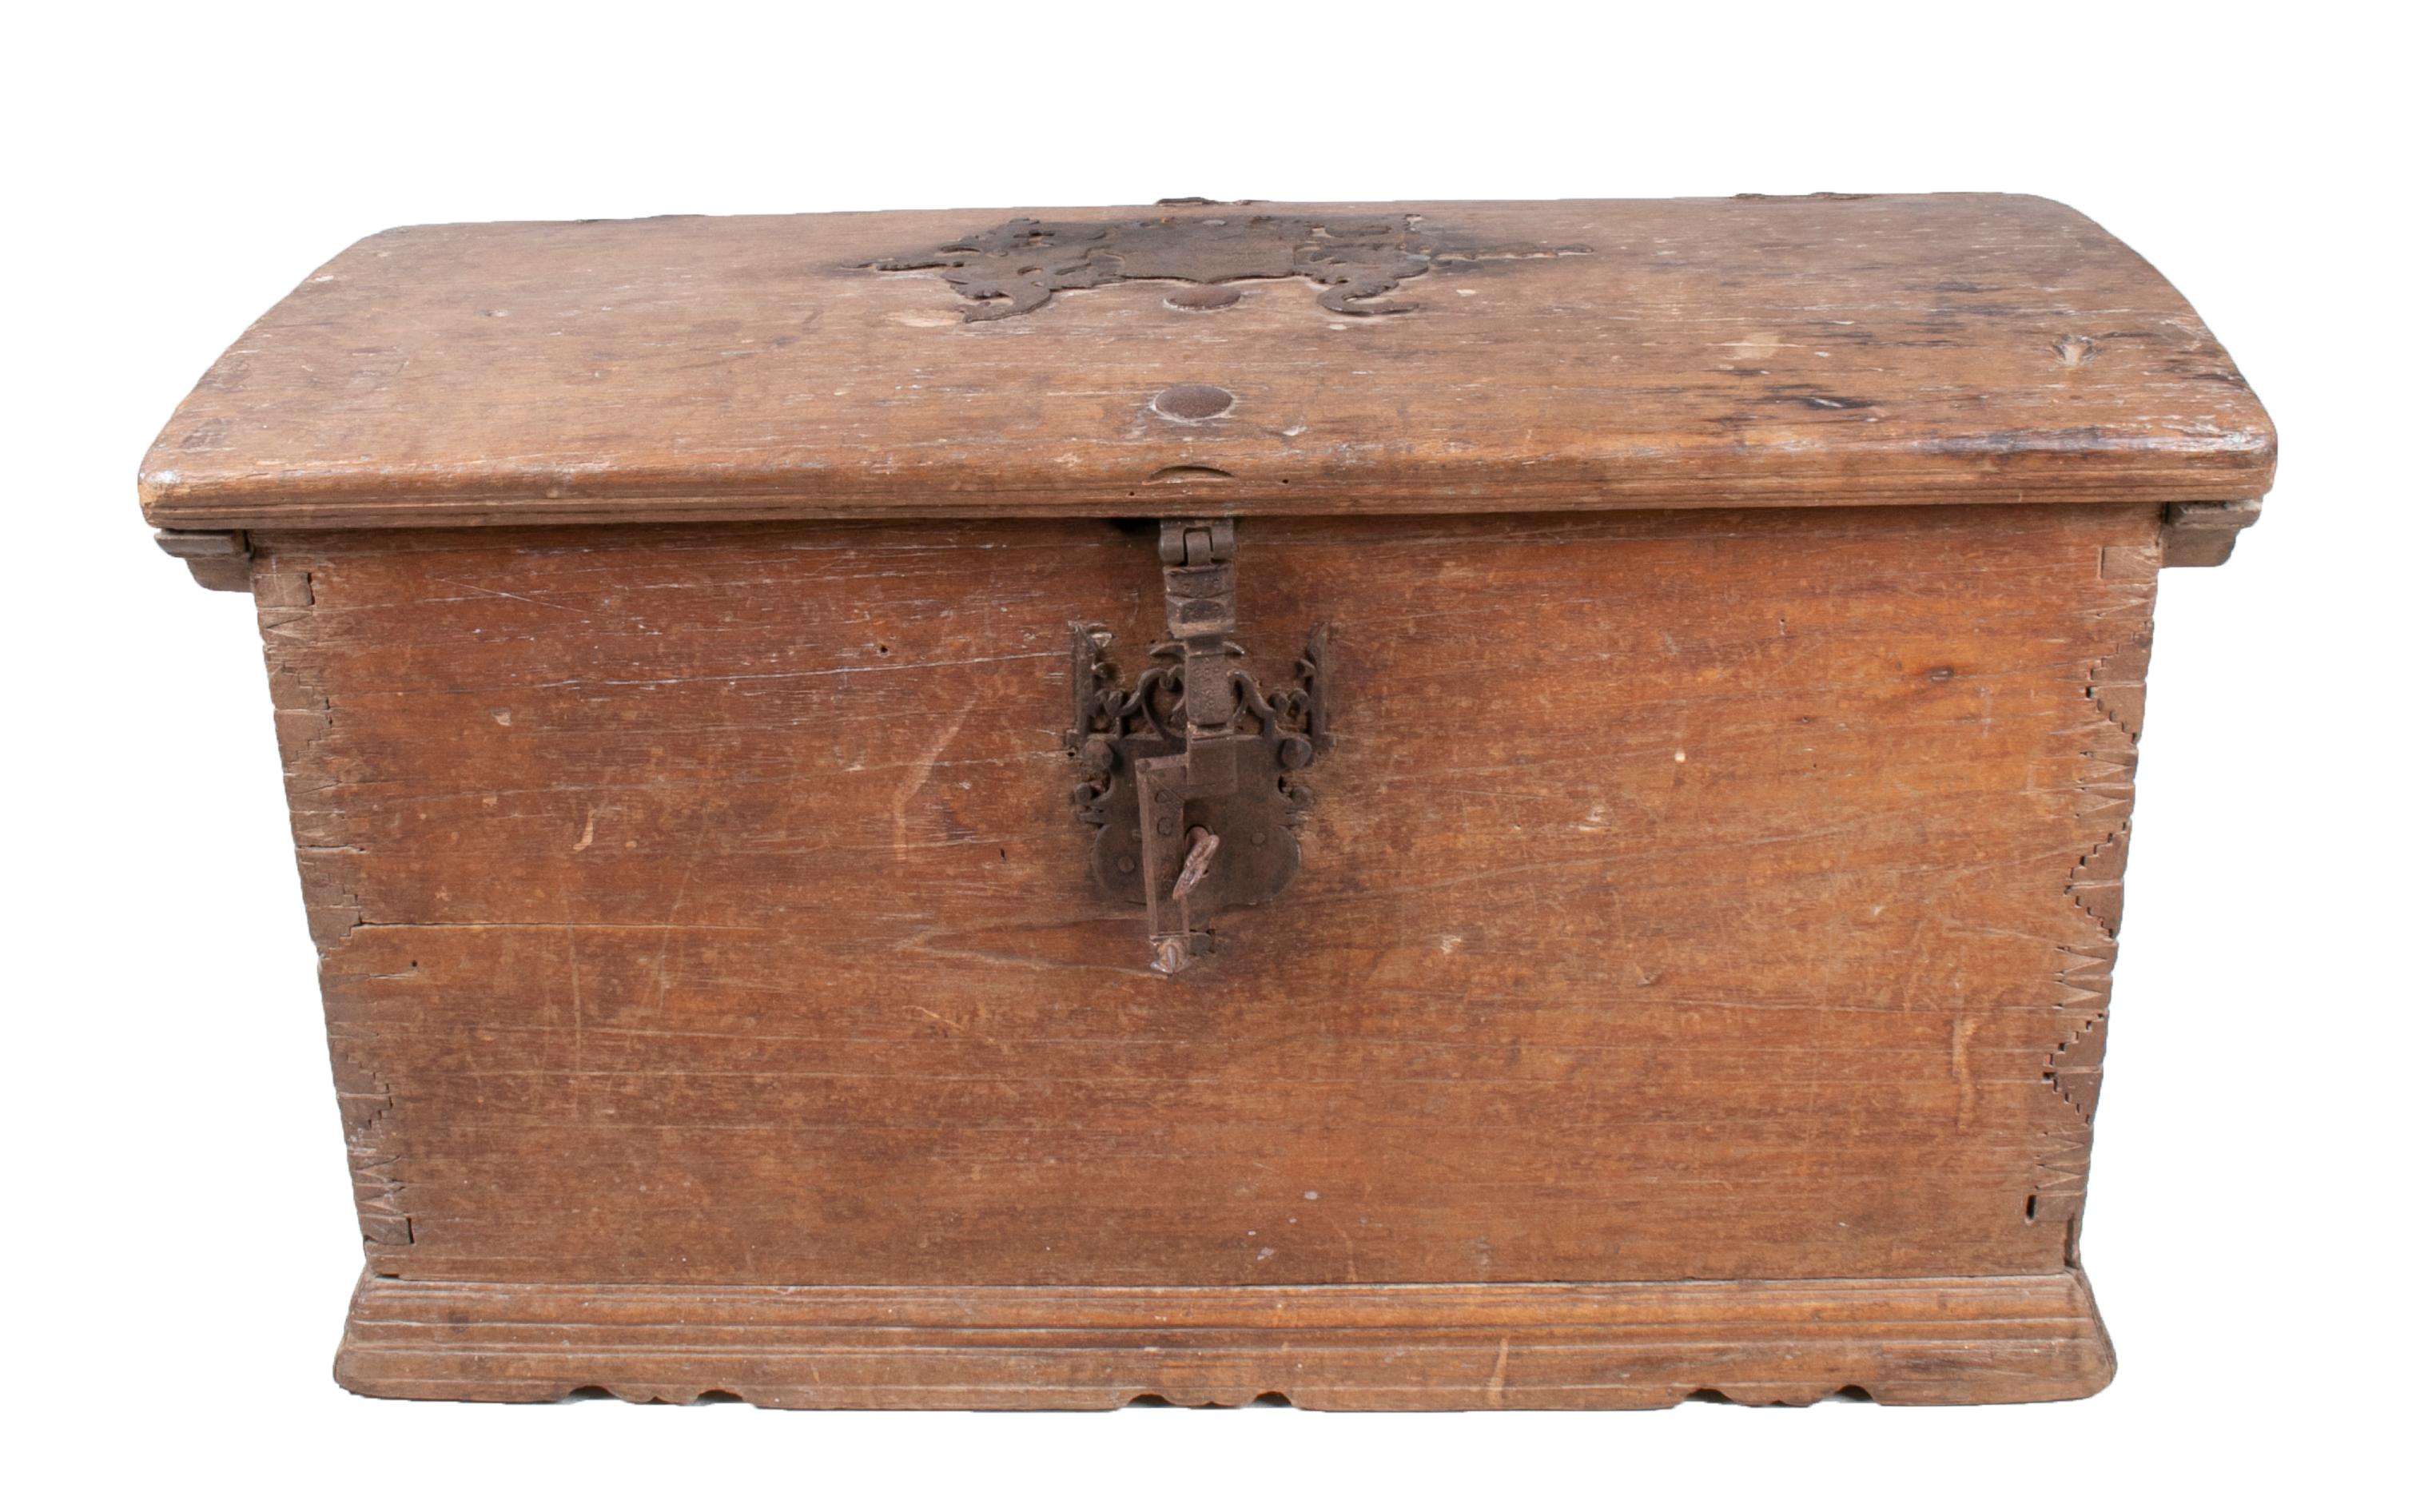 18th century Spanish pine wood rustic trunk with wrought iron fittings.